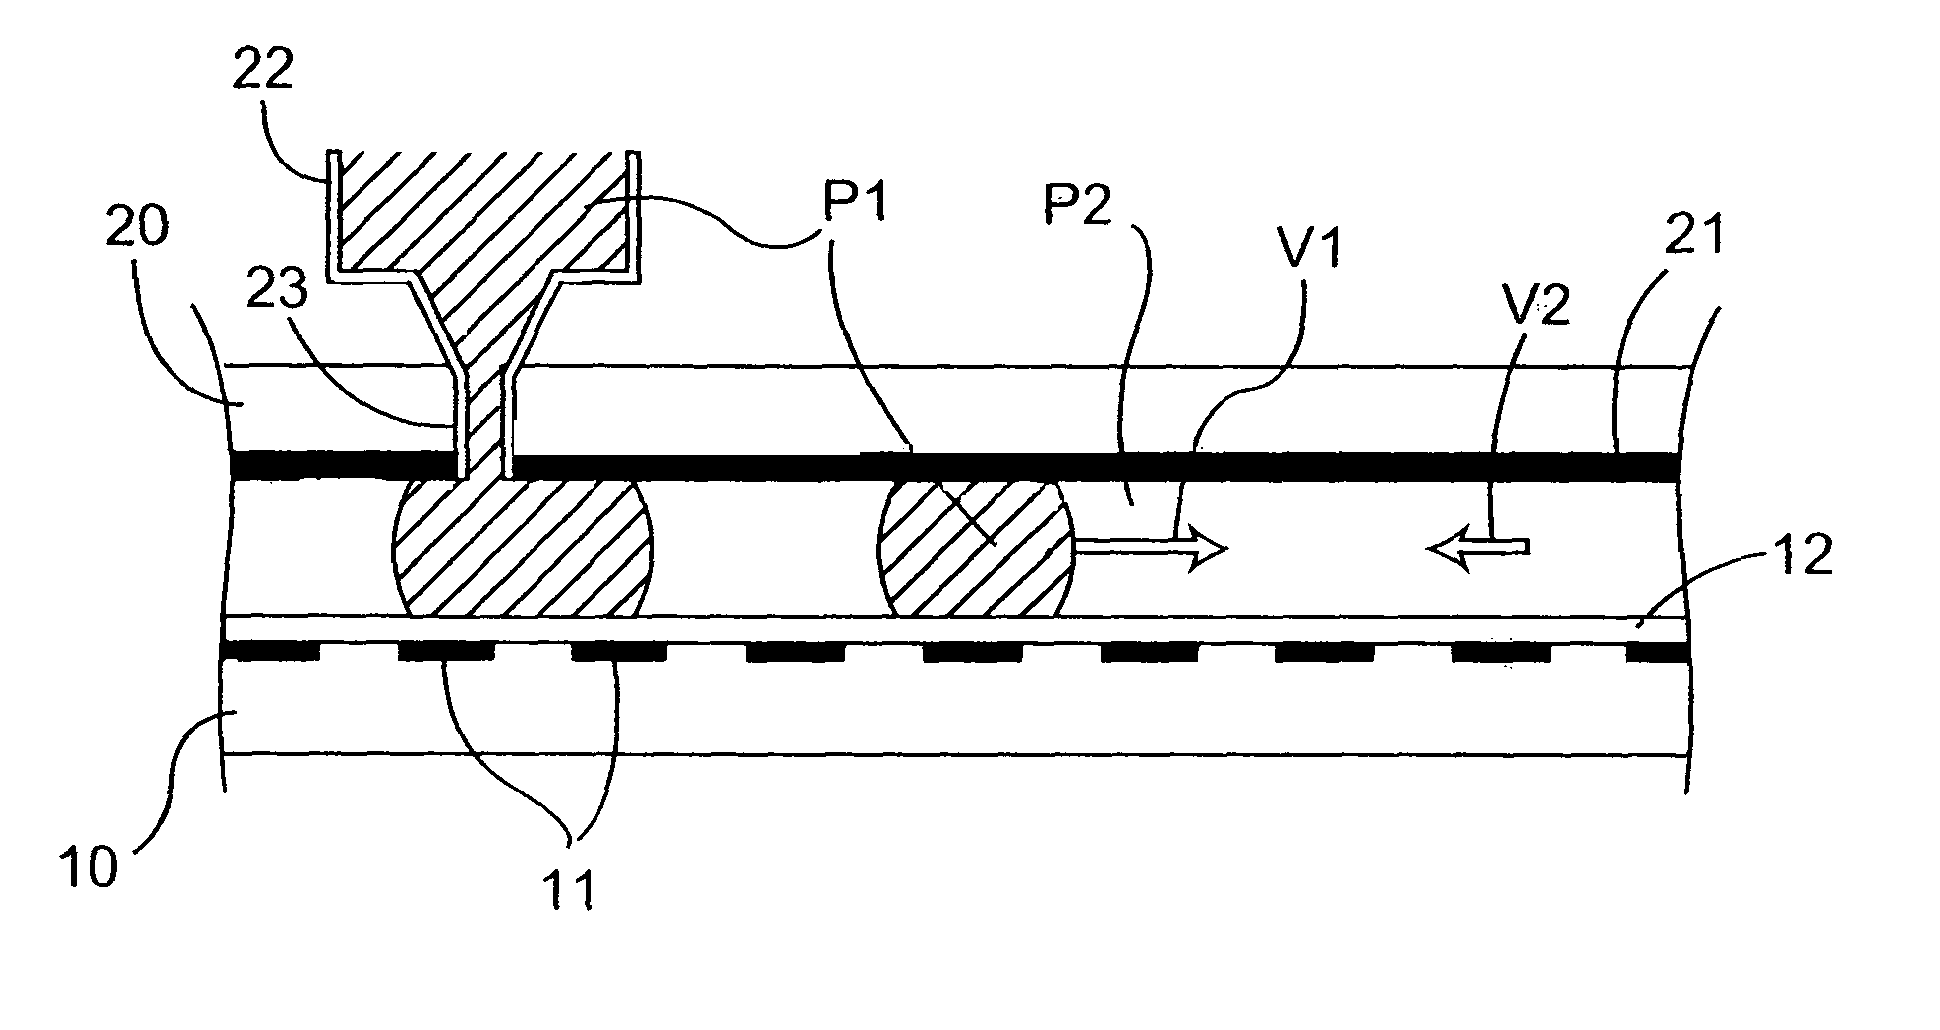 Microfluidic method and device for transferring mass between two immiscible phases